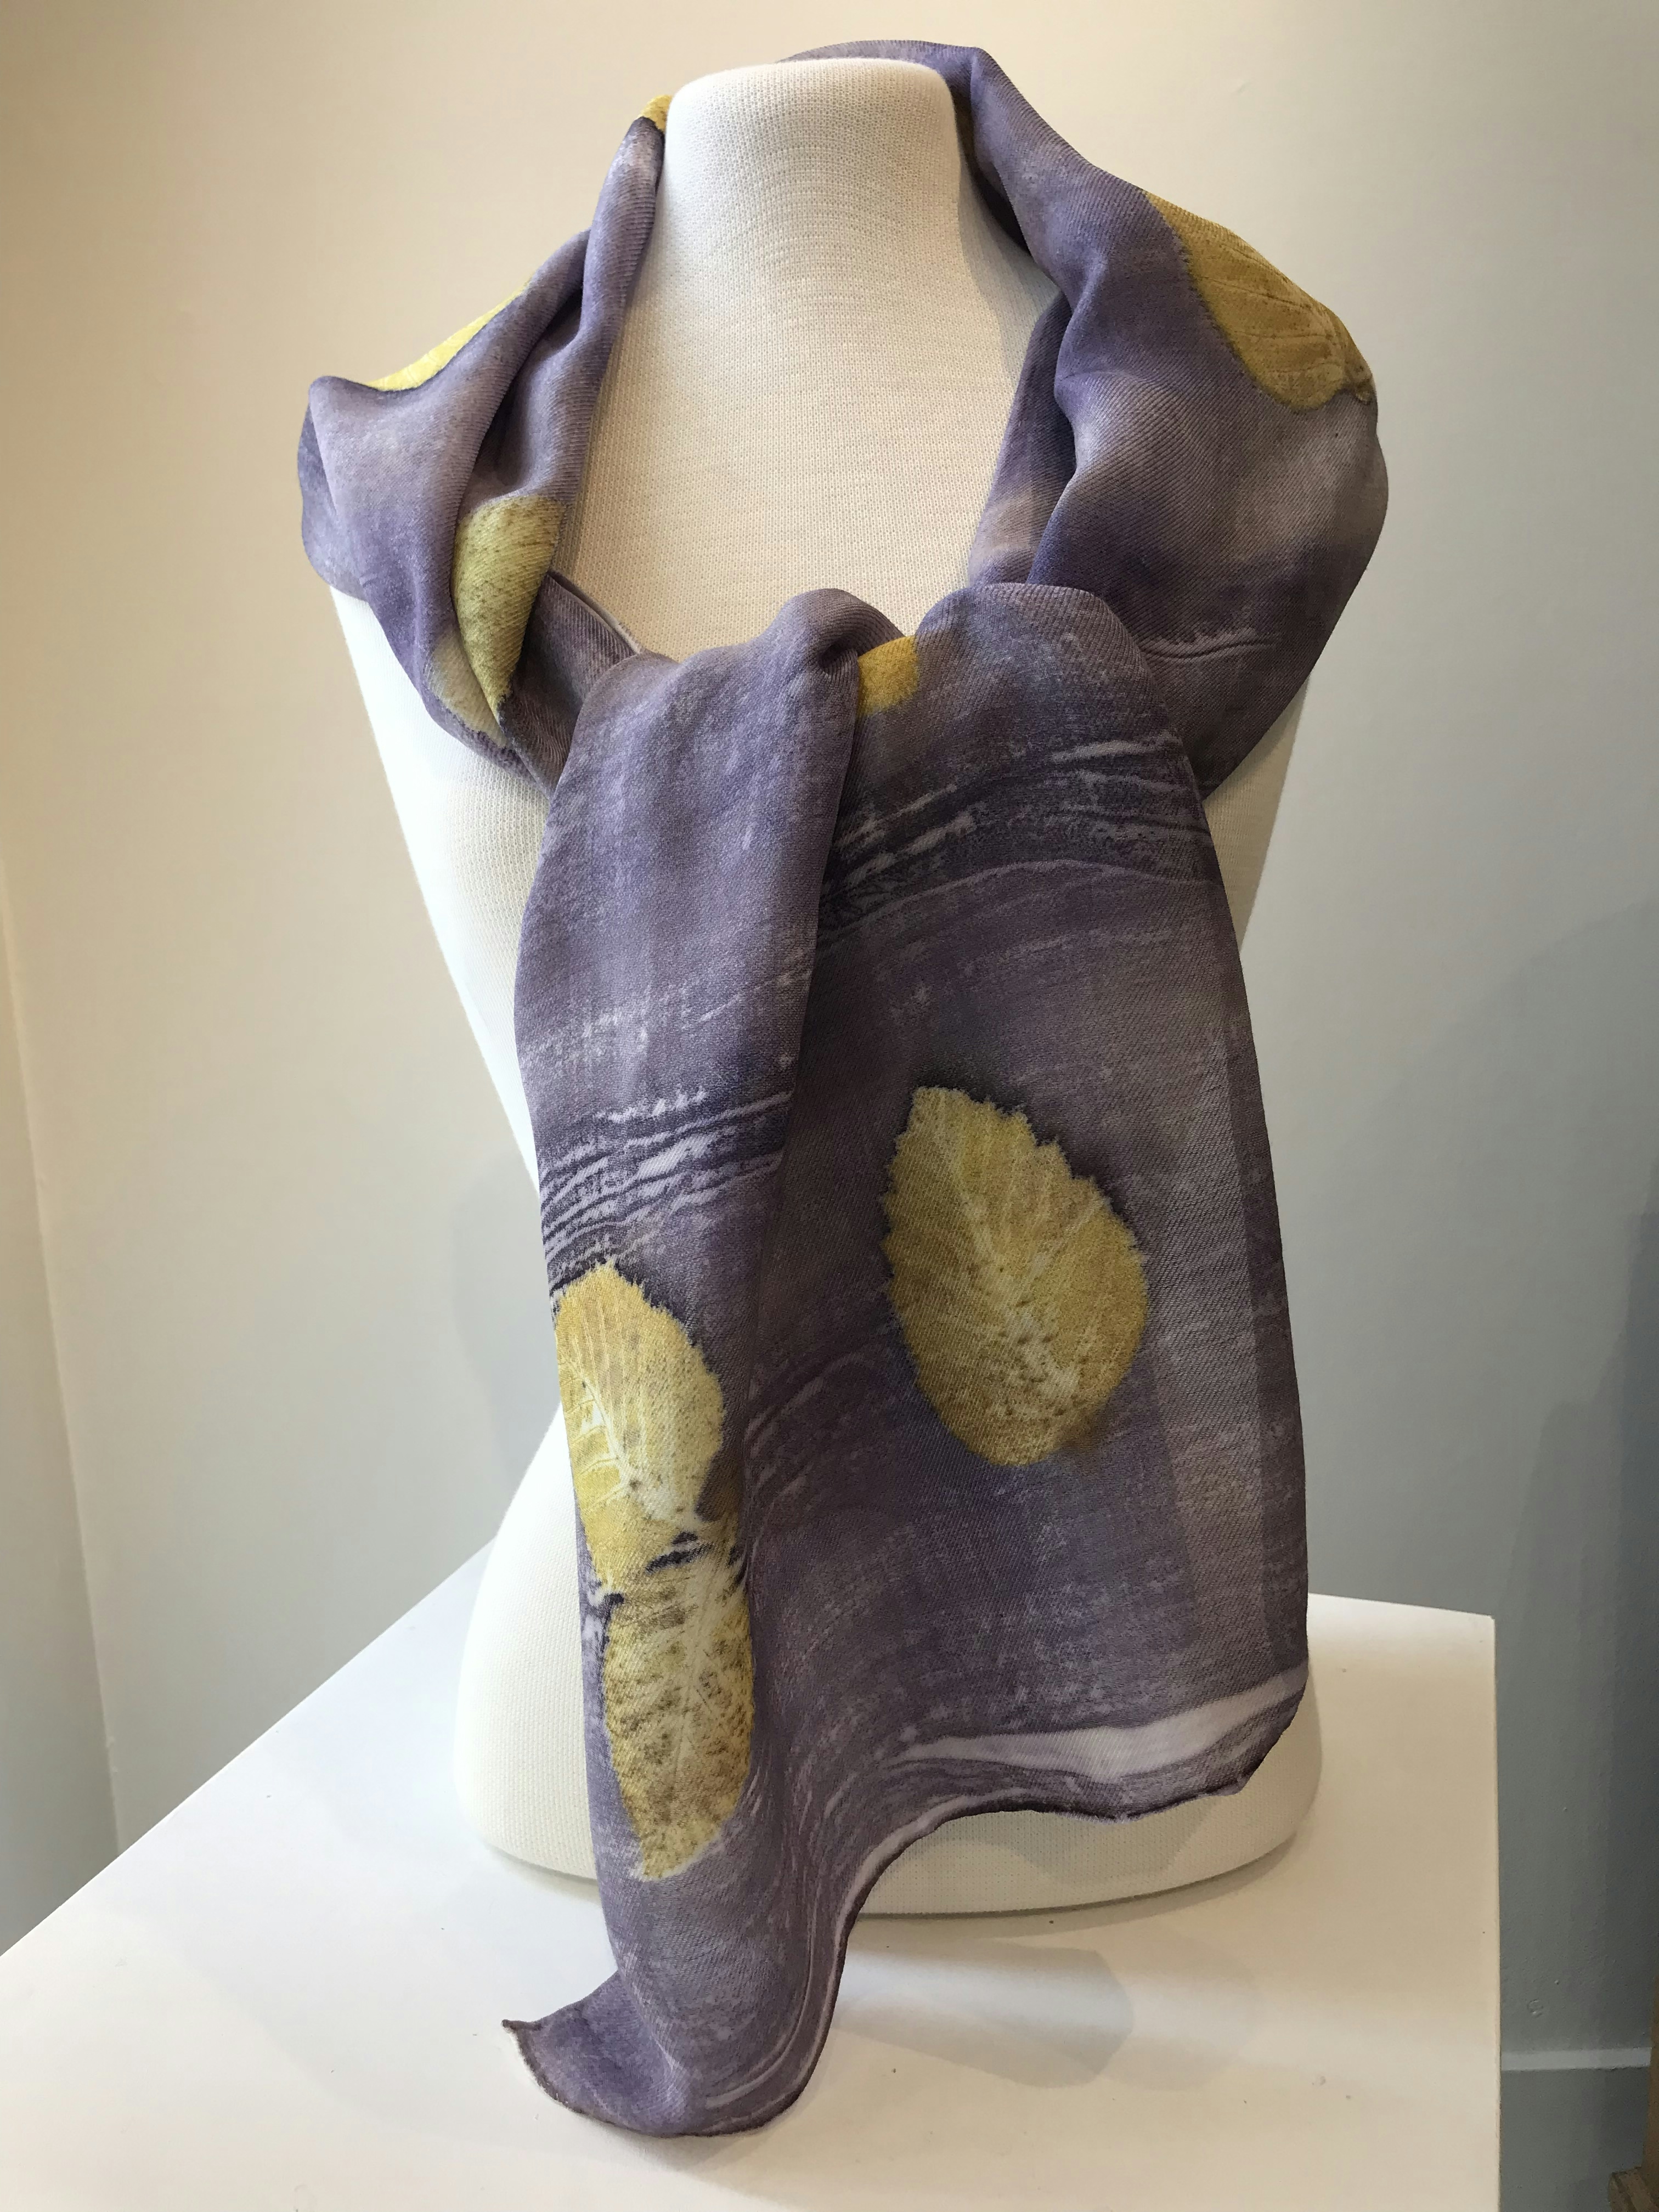 Naturally dyed scarf from silk and wool